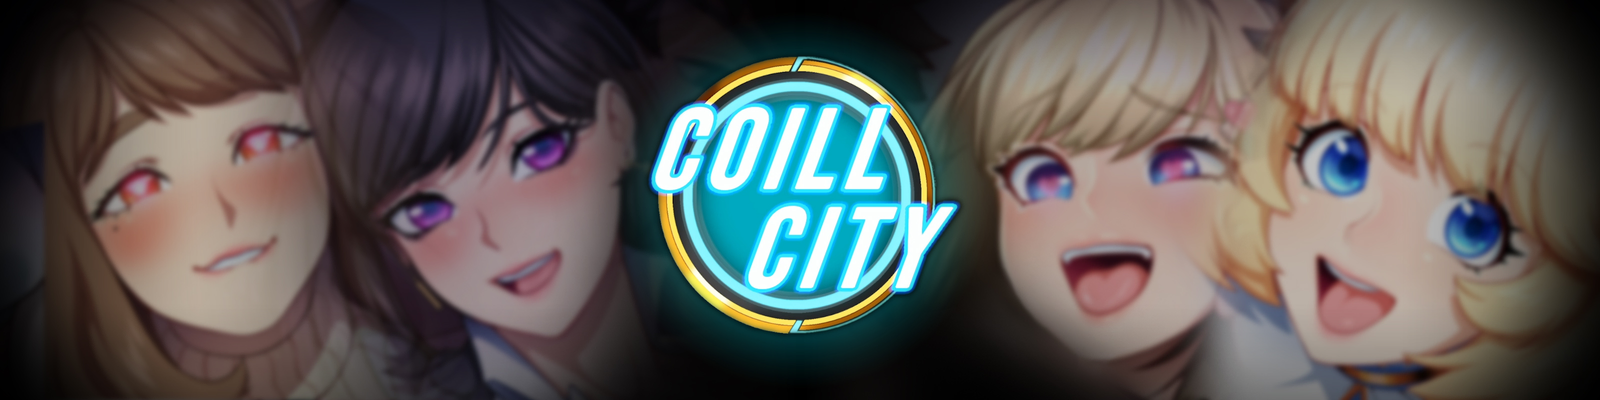 Coill City1.png